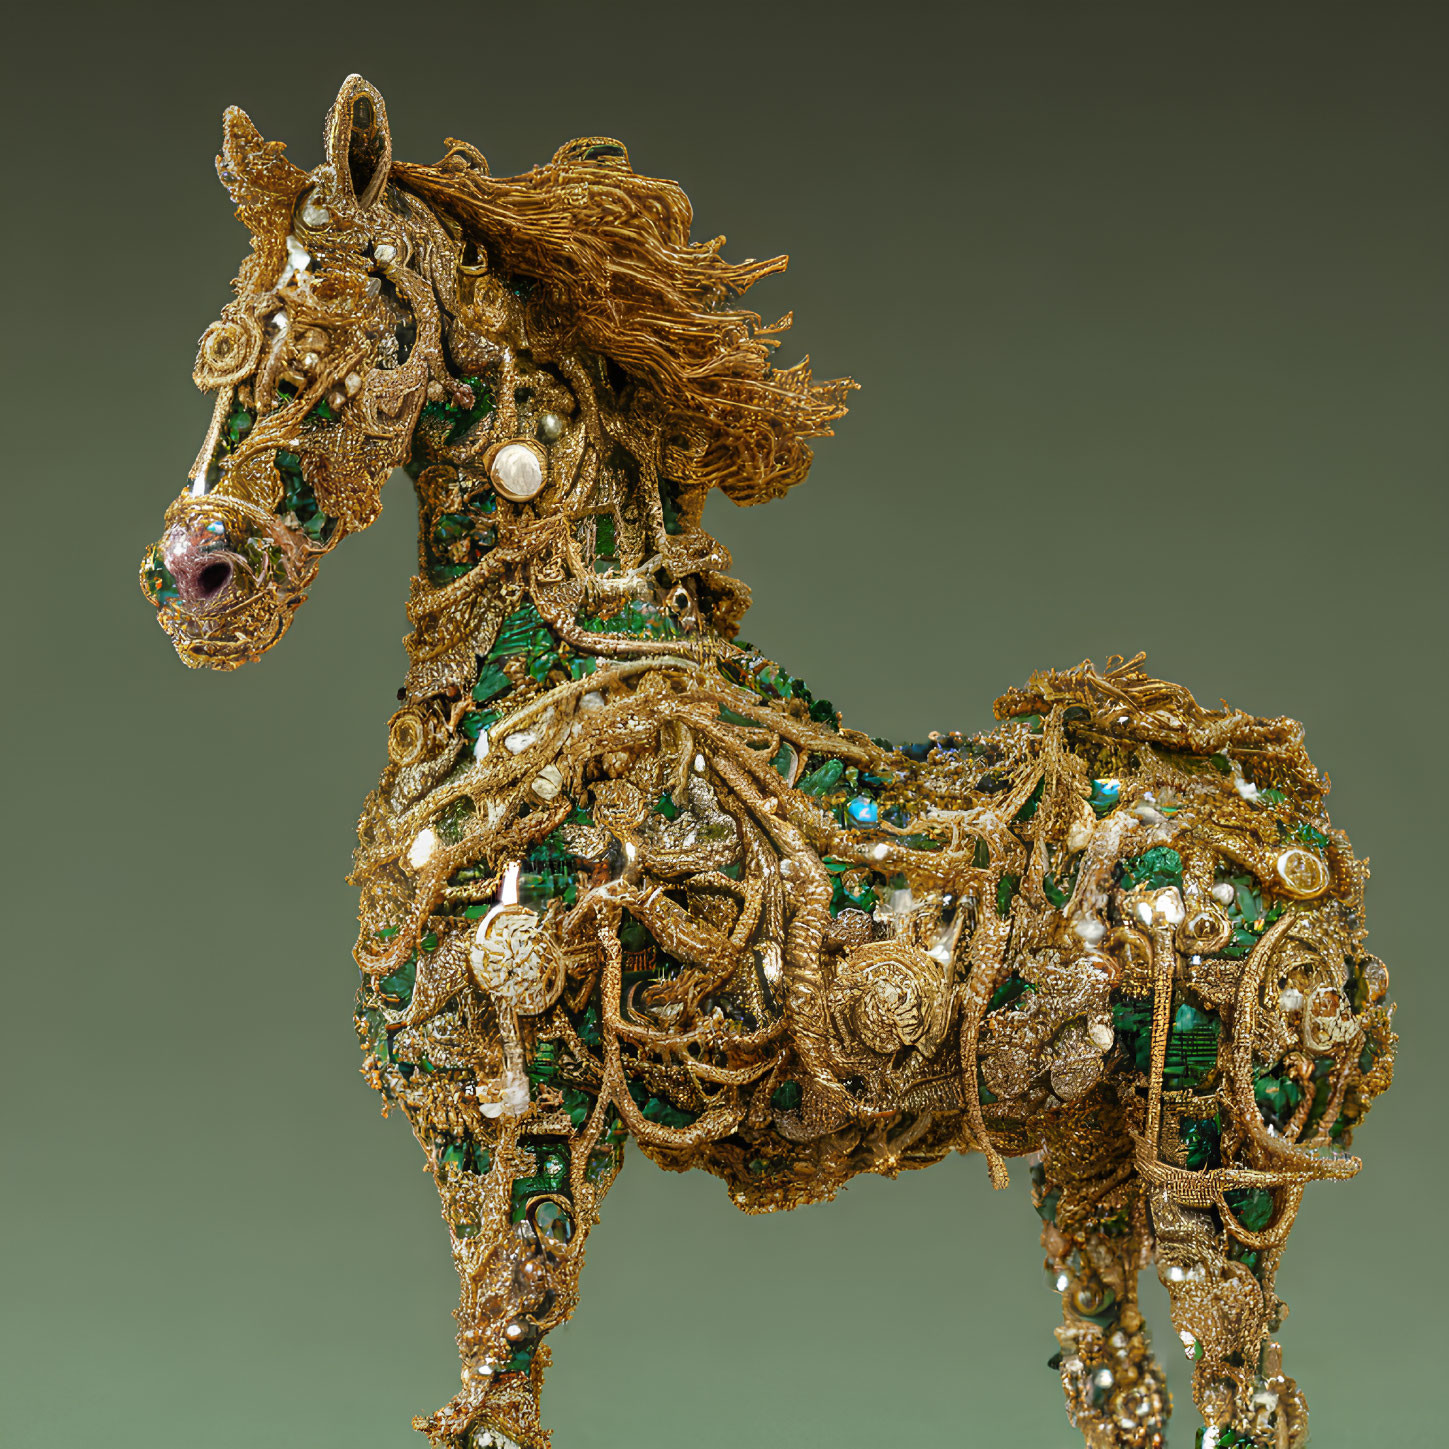 Intricate Horse Sculpture with Gold Filigree and Gem Accents